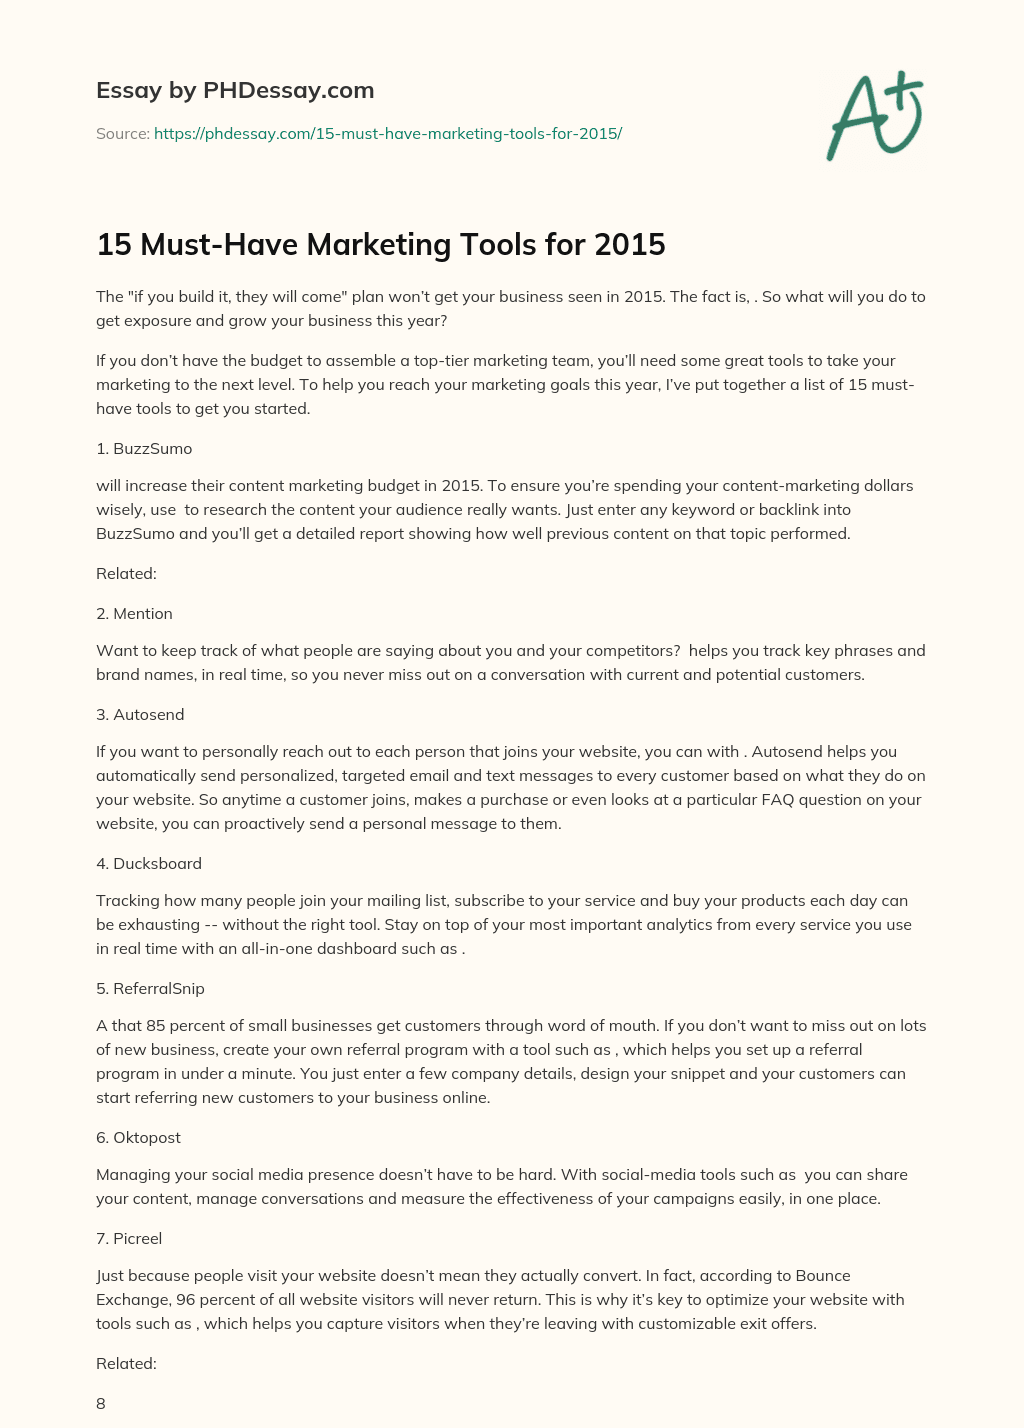 15 Must-Have Marketing Tools for 2015 essay